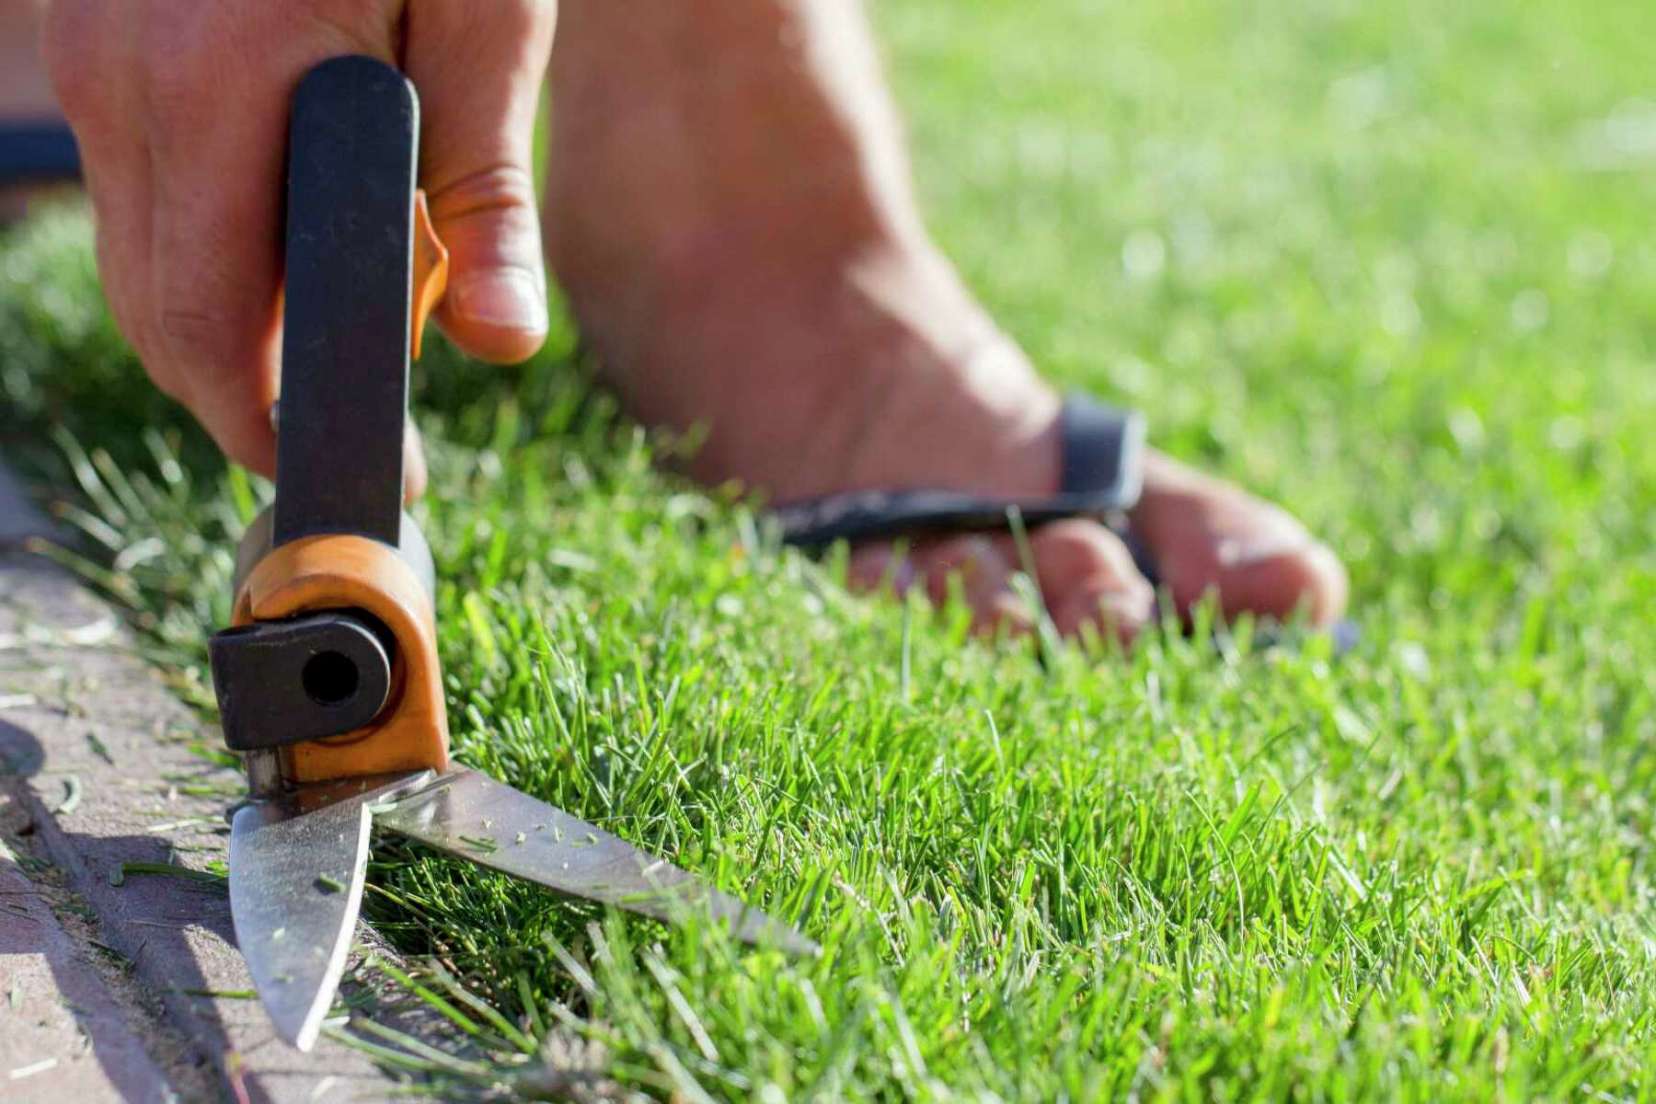 How to Tell if the Grass Is Too Tall for the Mower